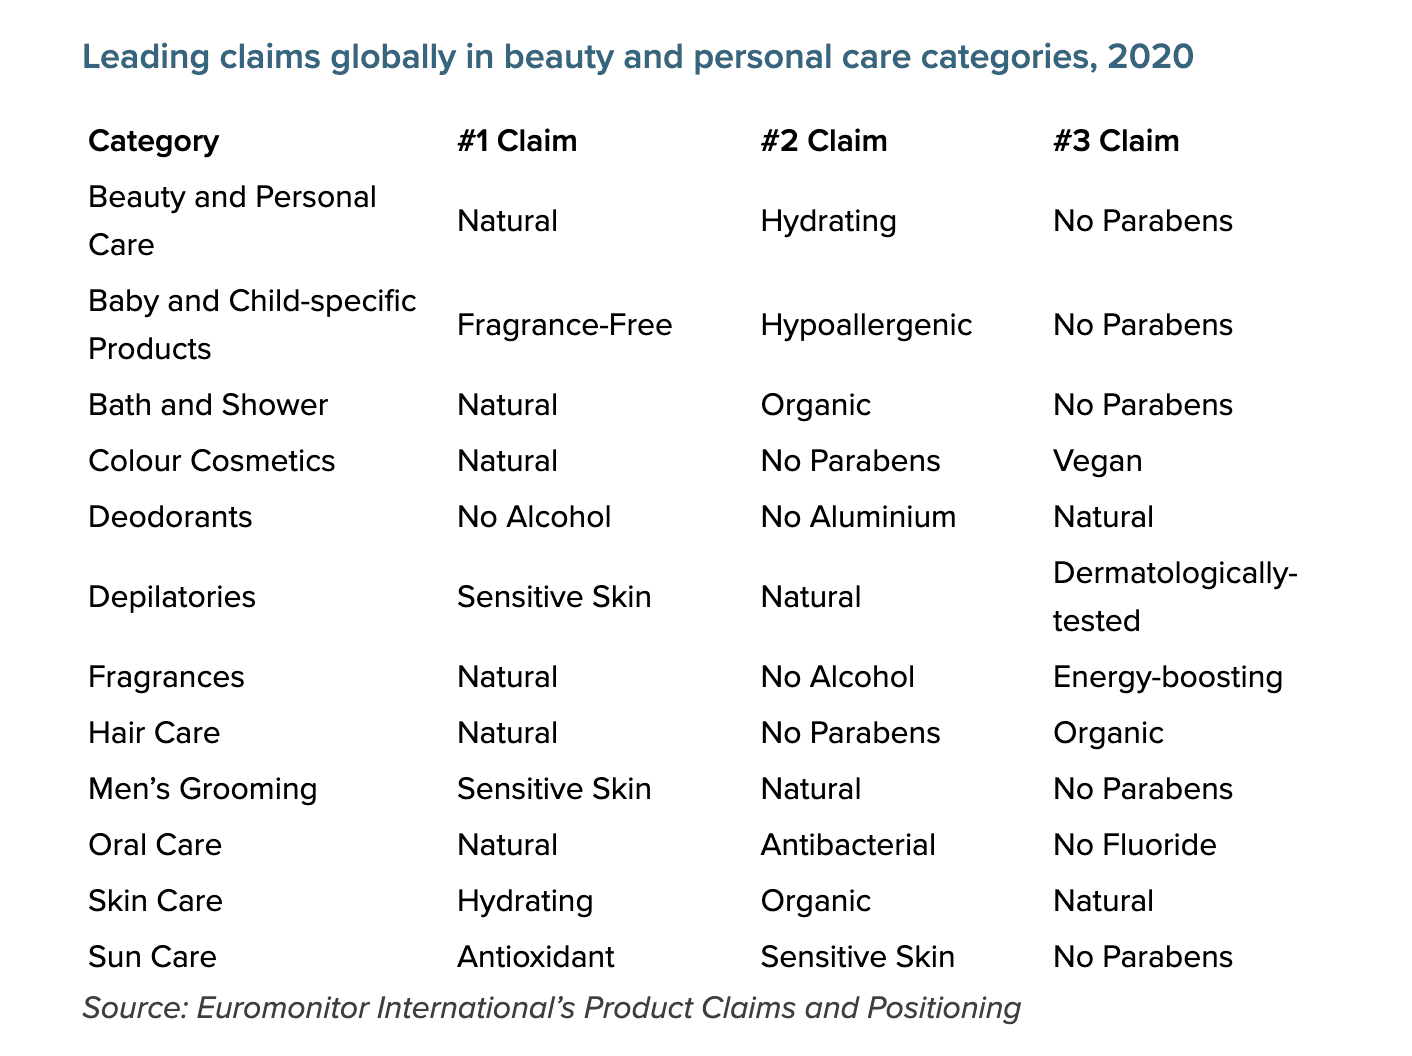 Leading claims globally in beauty and personal care categories in 2020 -  